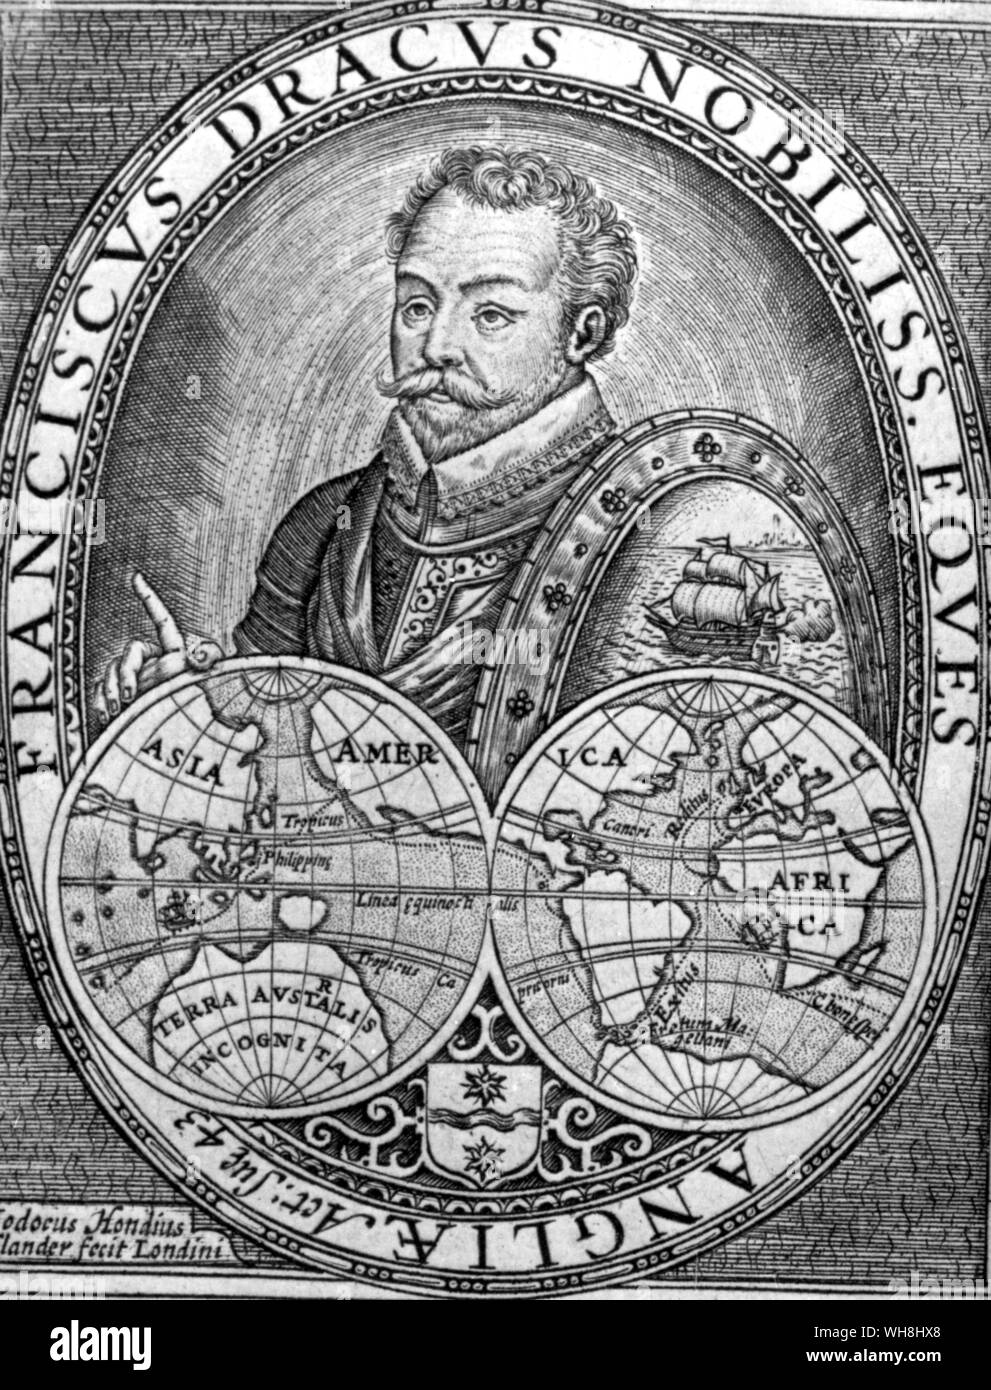 Sir Francis Drake, (c.1540-1596) was an English privateer, navigator, naval pioneer and raider, politician, civil engineer, and boating enthusiast of the Elizabethan period. He was the first captain to completely circumnavigate the globe (Magellan did not live to finish his circumnavigation). He was also second in command of the English fleet against the Spanish Armada in 1588. Antarctica: The Last Continent by Ian Cameron, page 27. Stock Photo